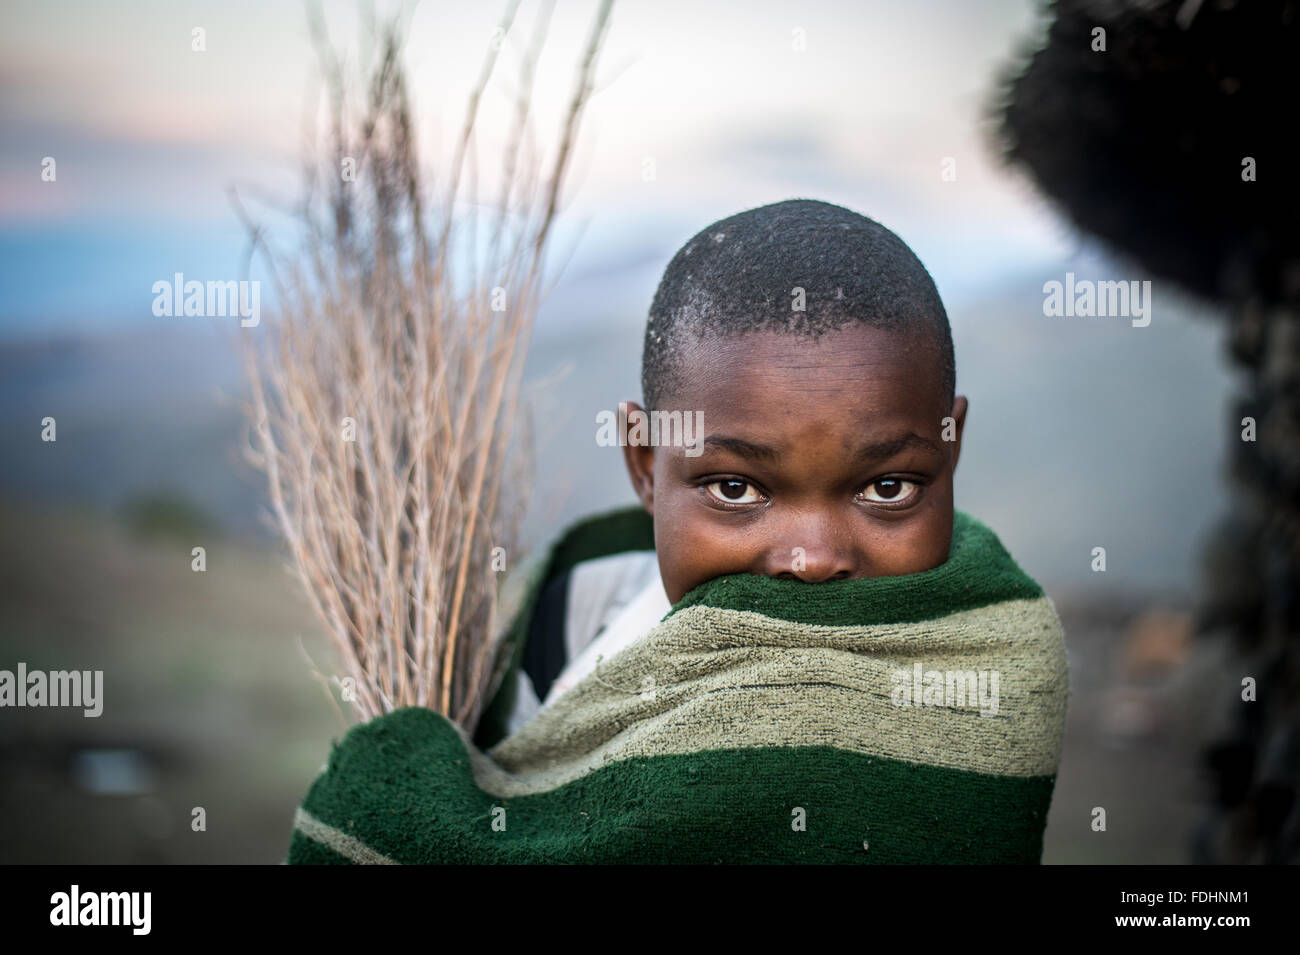 Young boy wrapped in a blanket standing in front of a stone hut in Lesotho, Africa Stock Photo